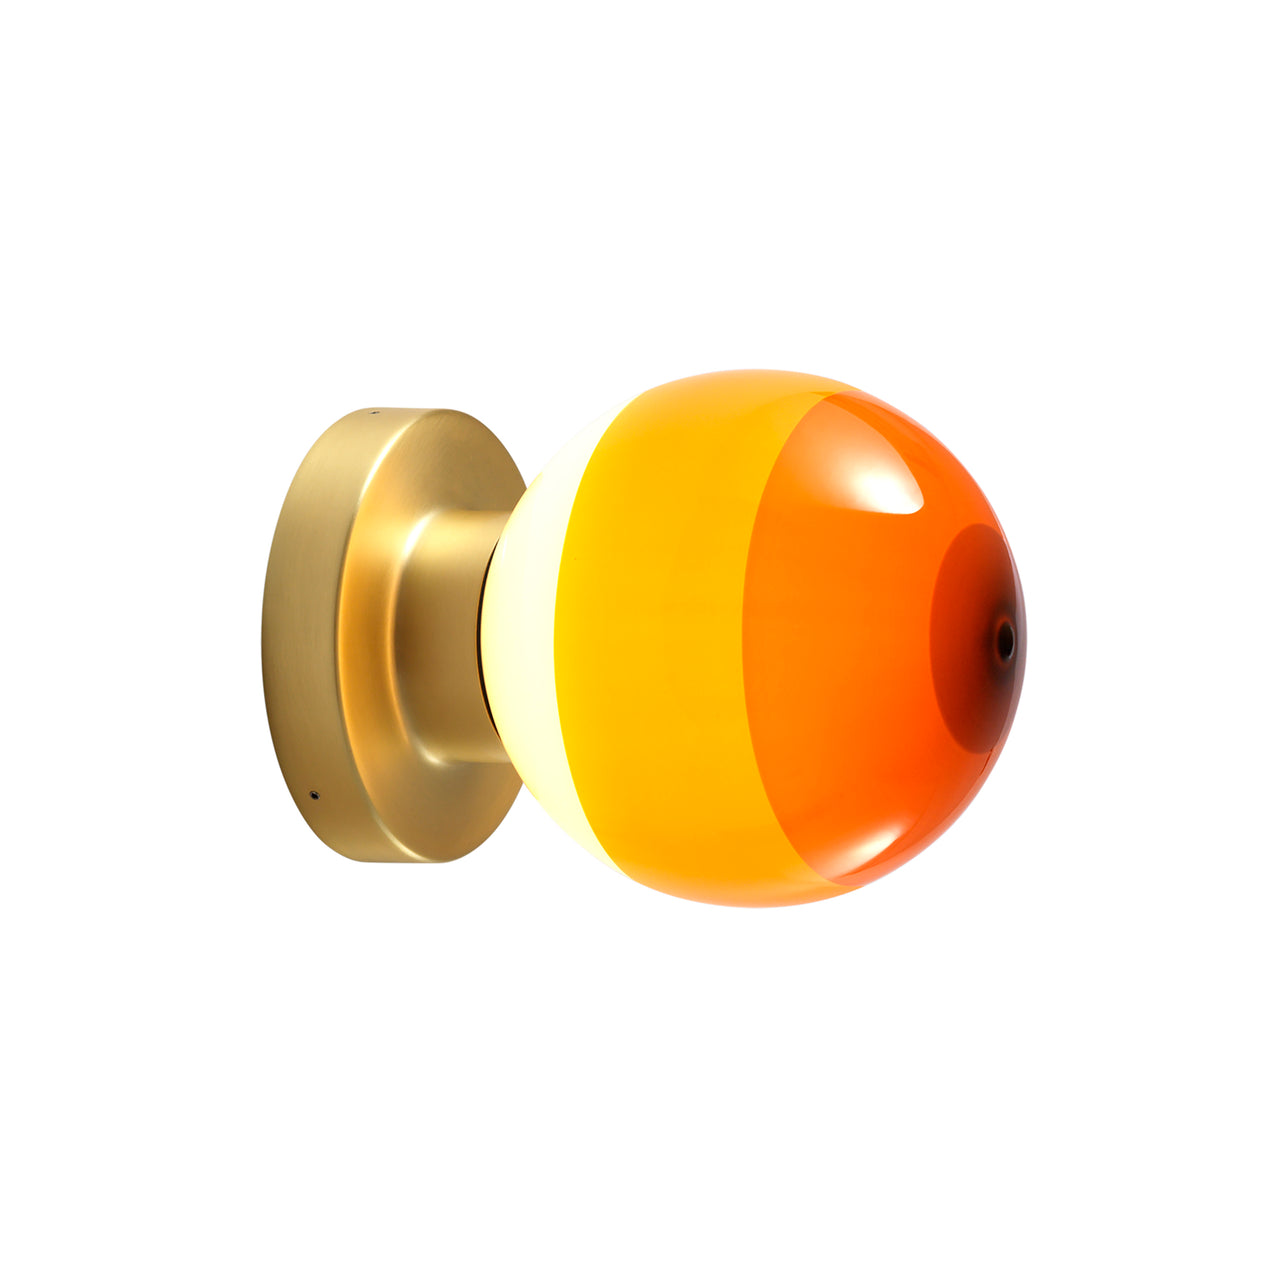 Dipping Wall Light: A2-13 + Brushed Brass + Amber